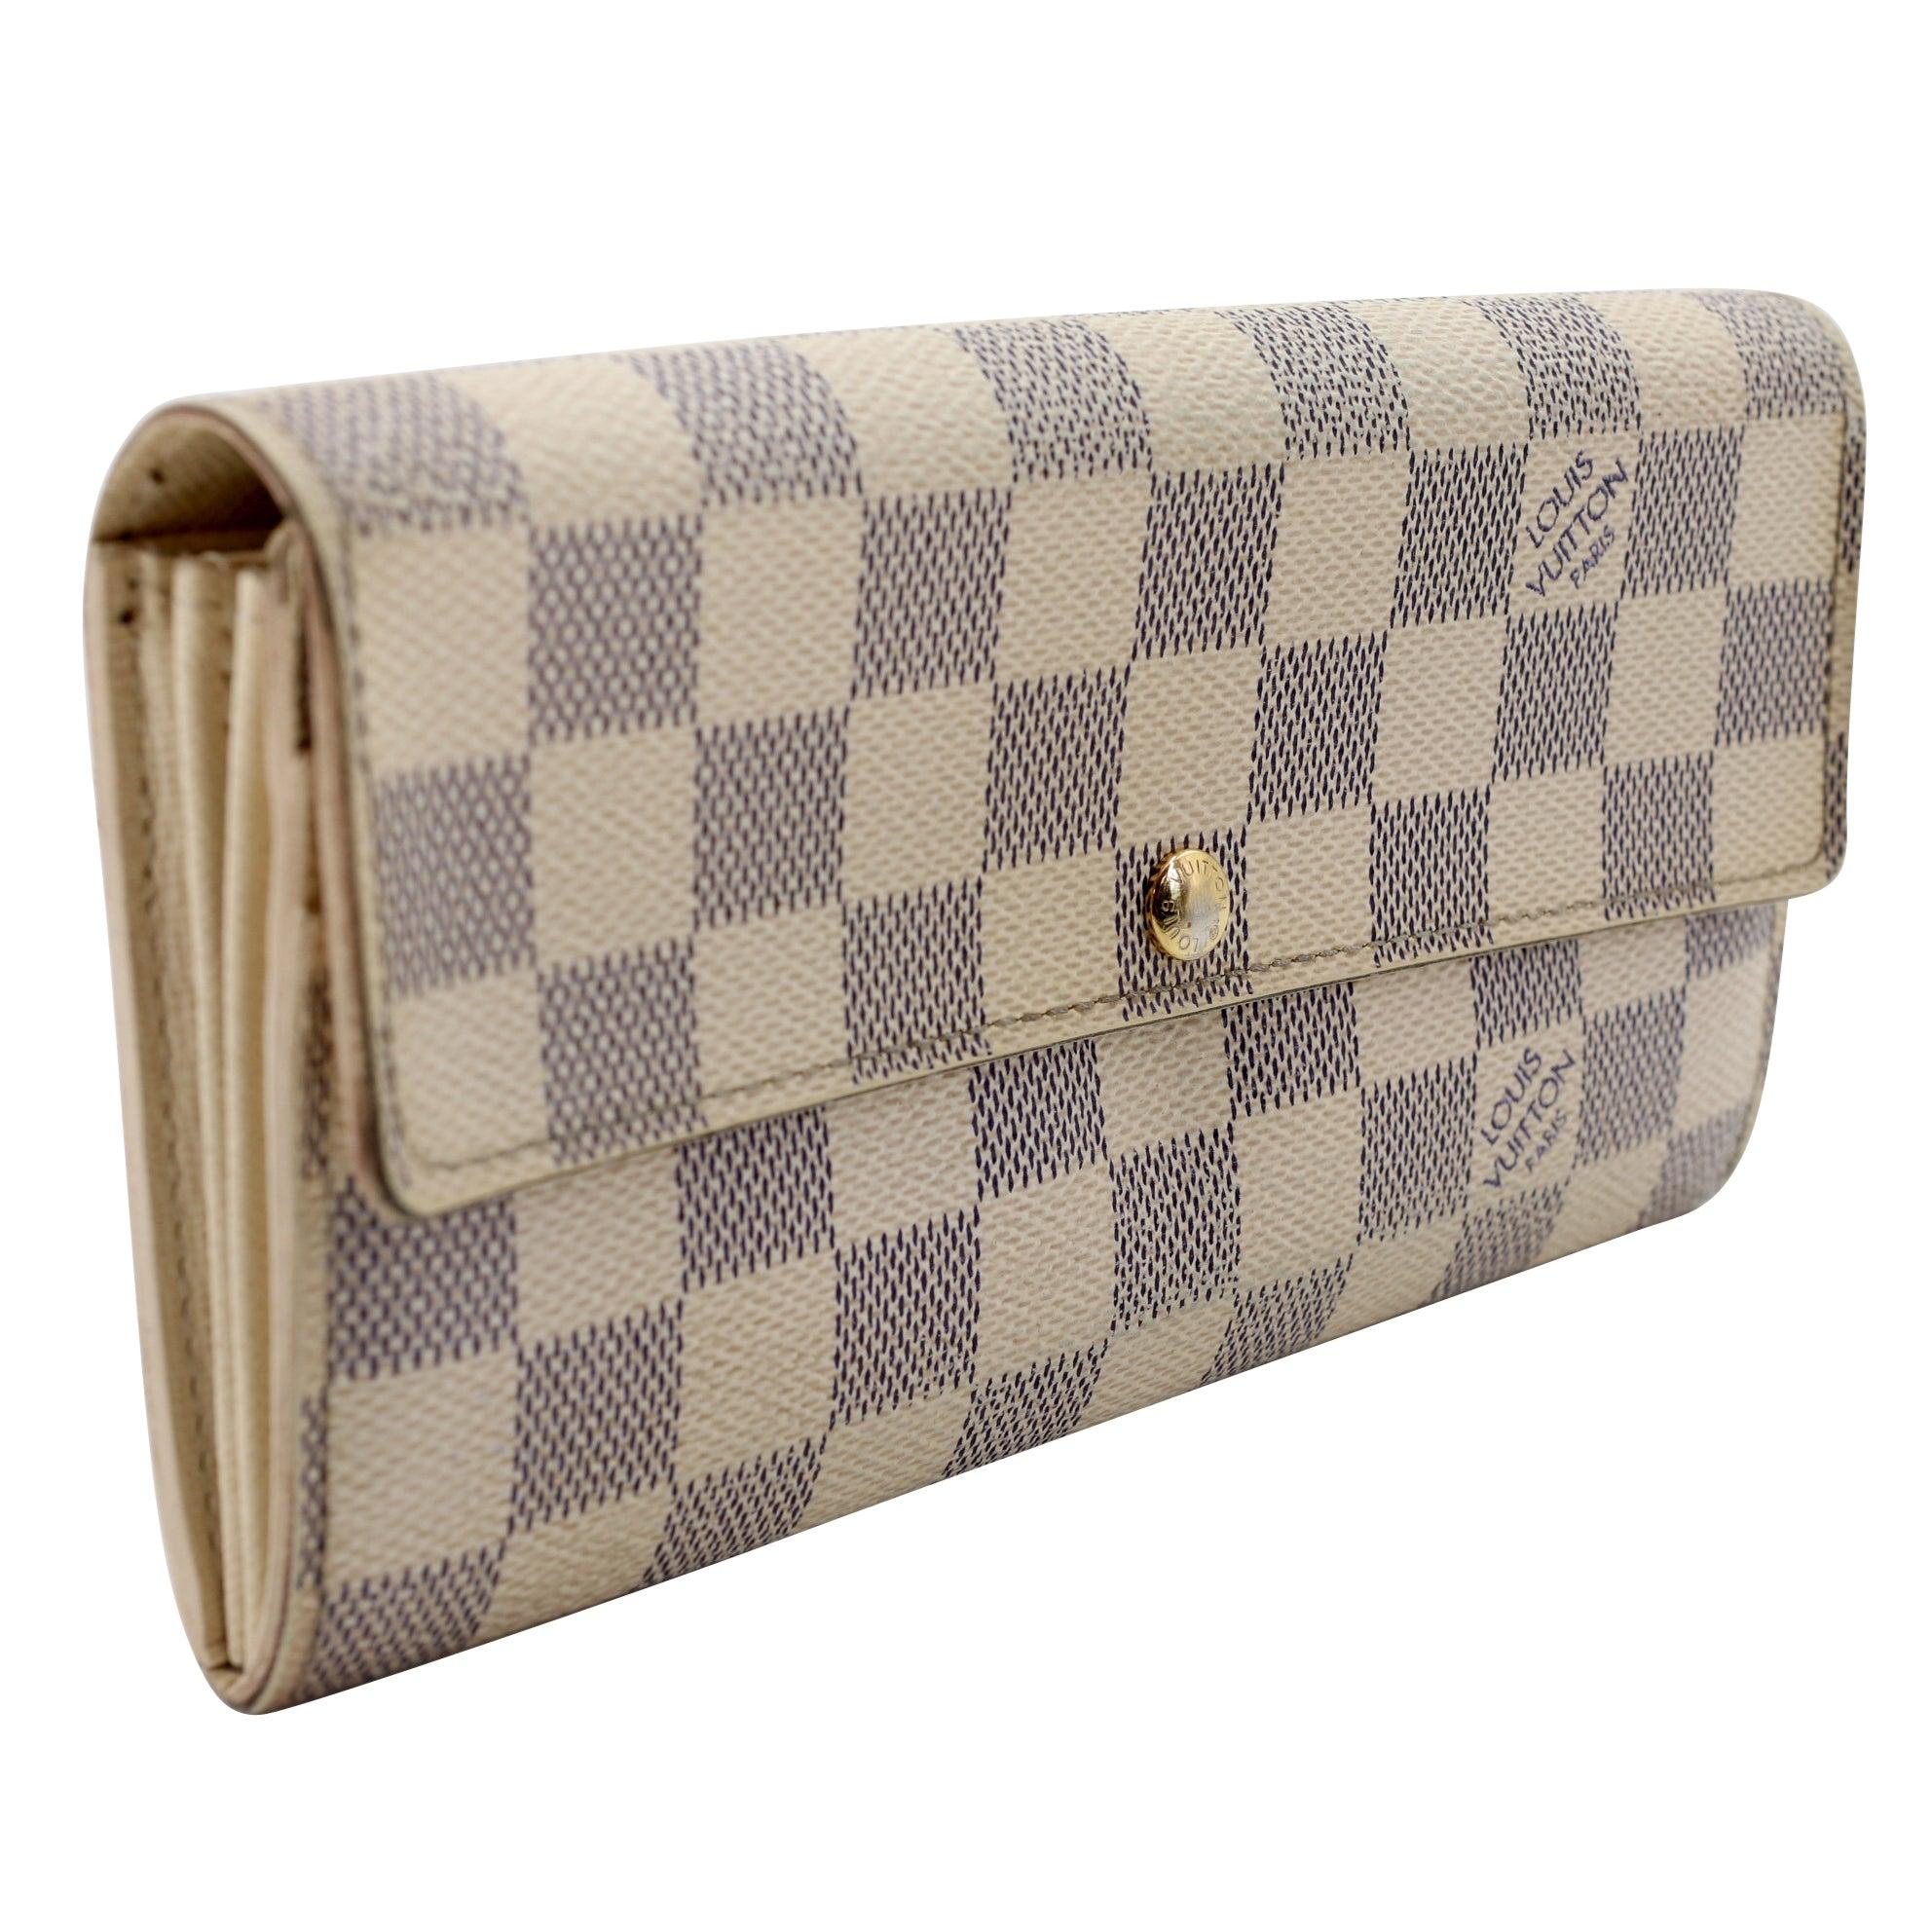 This Louis Vuitton Damier Azur Canvas Sarah Wallet is the most elegant way to organize your essentials like your bills, currency, credit cards and plenty of coins. This delightful piece will always be a popular and timeless classic. The exterior